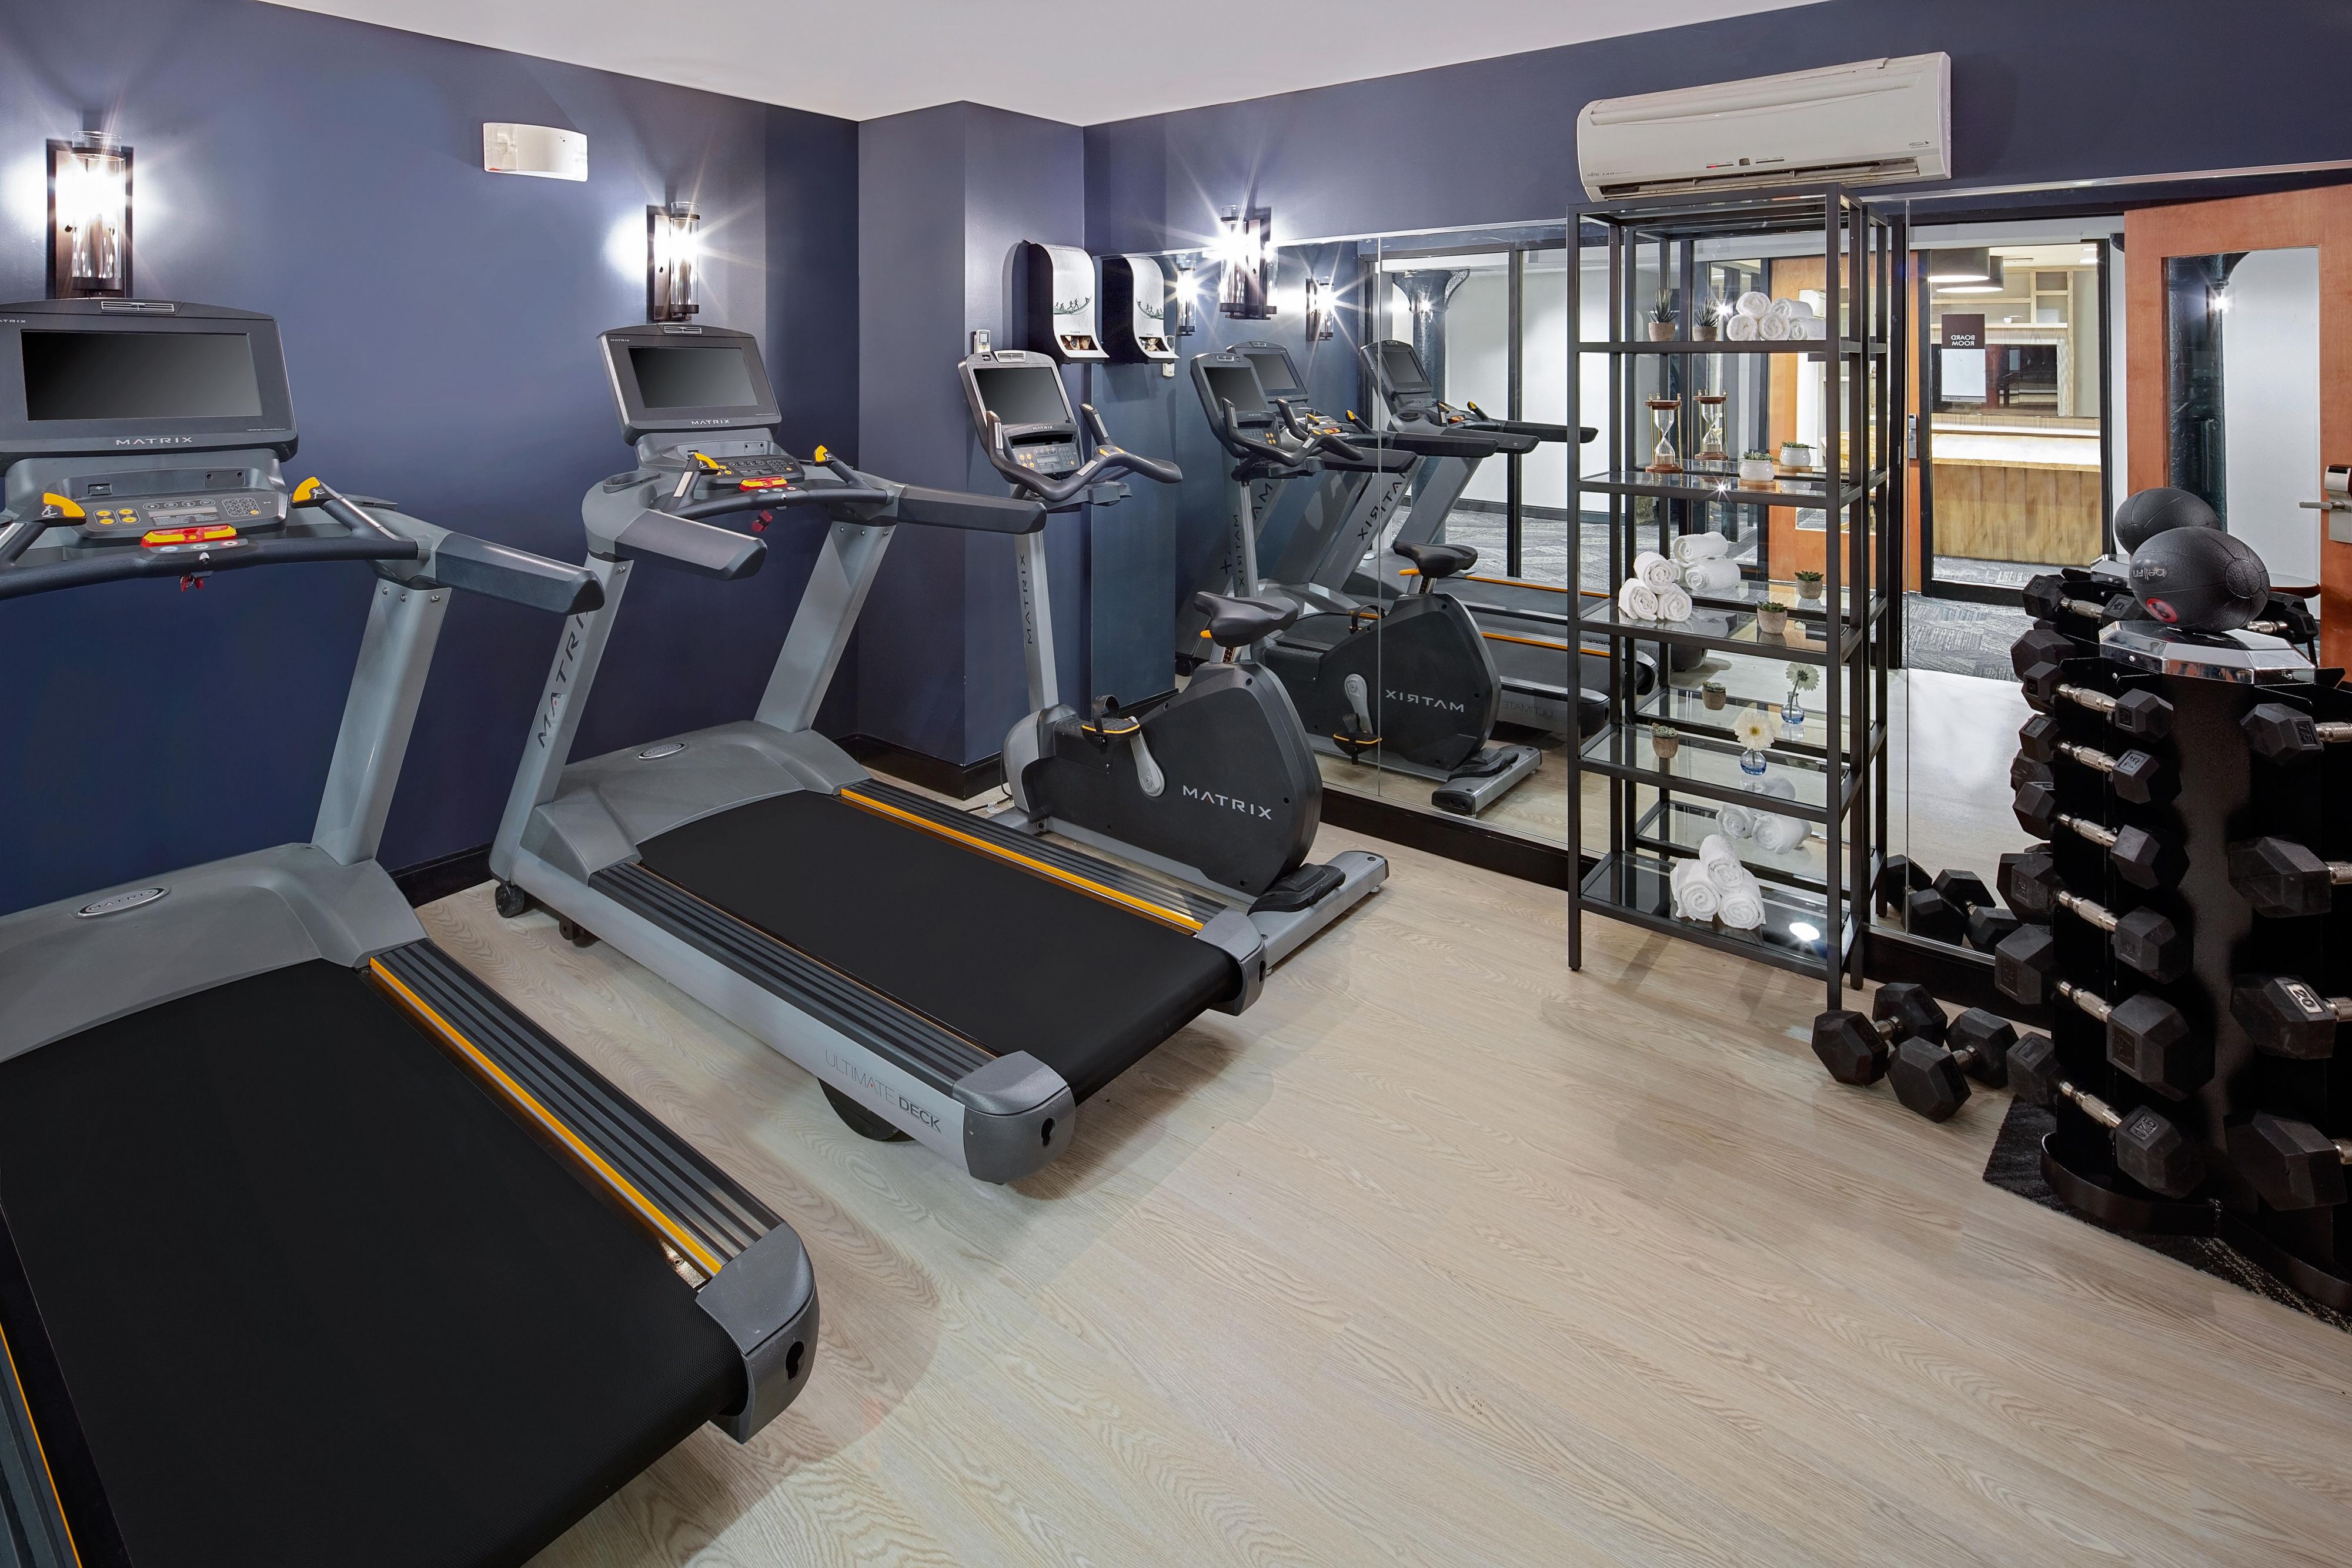 During your stay, enjoy our large Fitness Center located in our lower level. Open 24 hours, we have towels, complimentary earbuds for our cardio equipment should you need it, and a water bottle fill station all available to you.